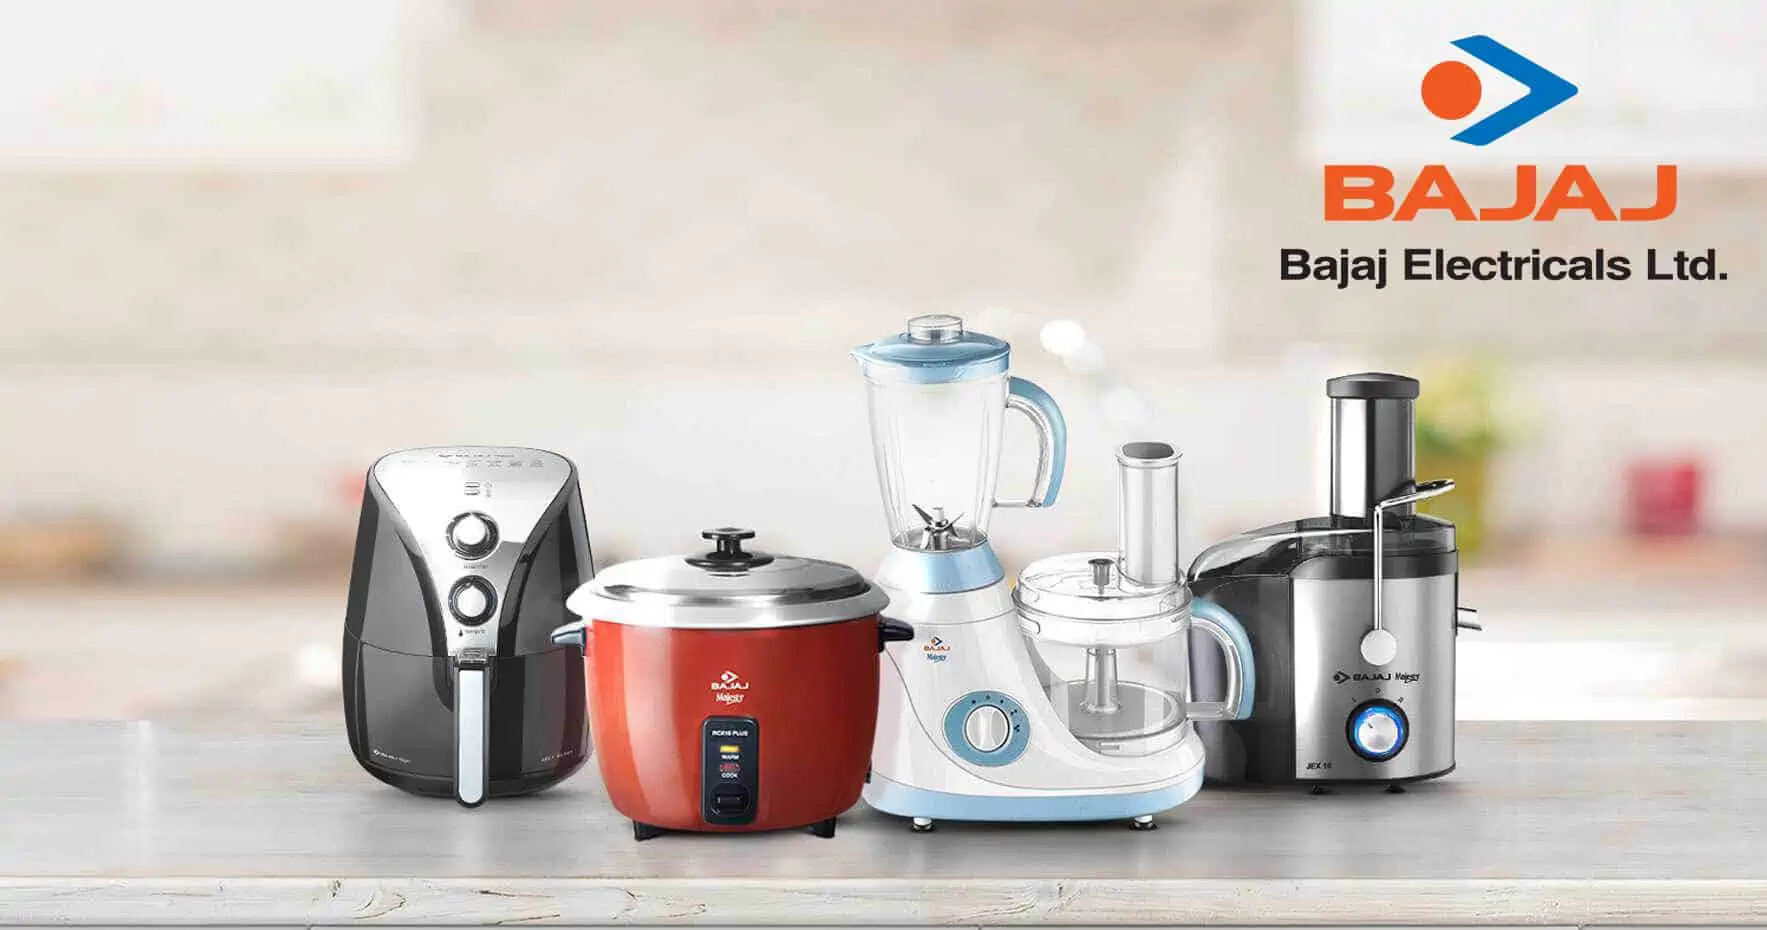 Bajaj Electricals a top electrical companies in India with its home appliances